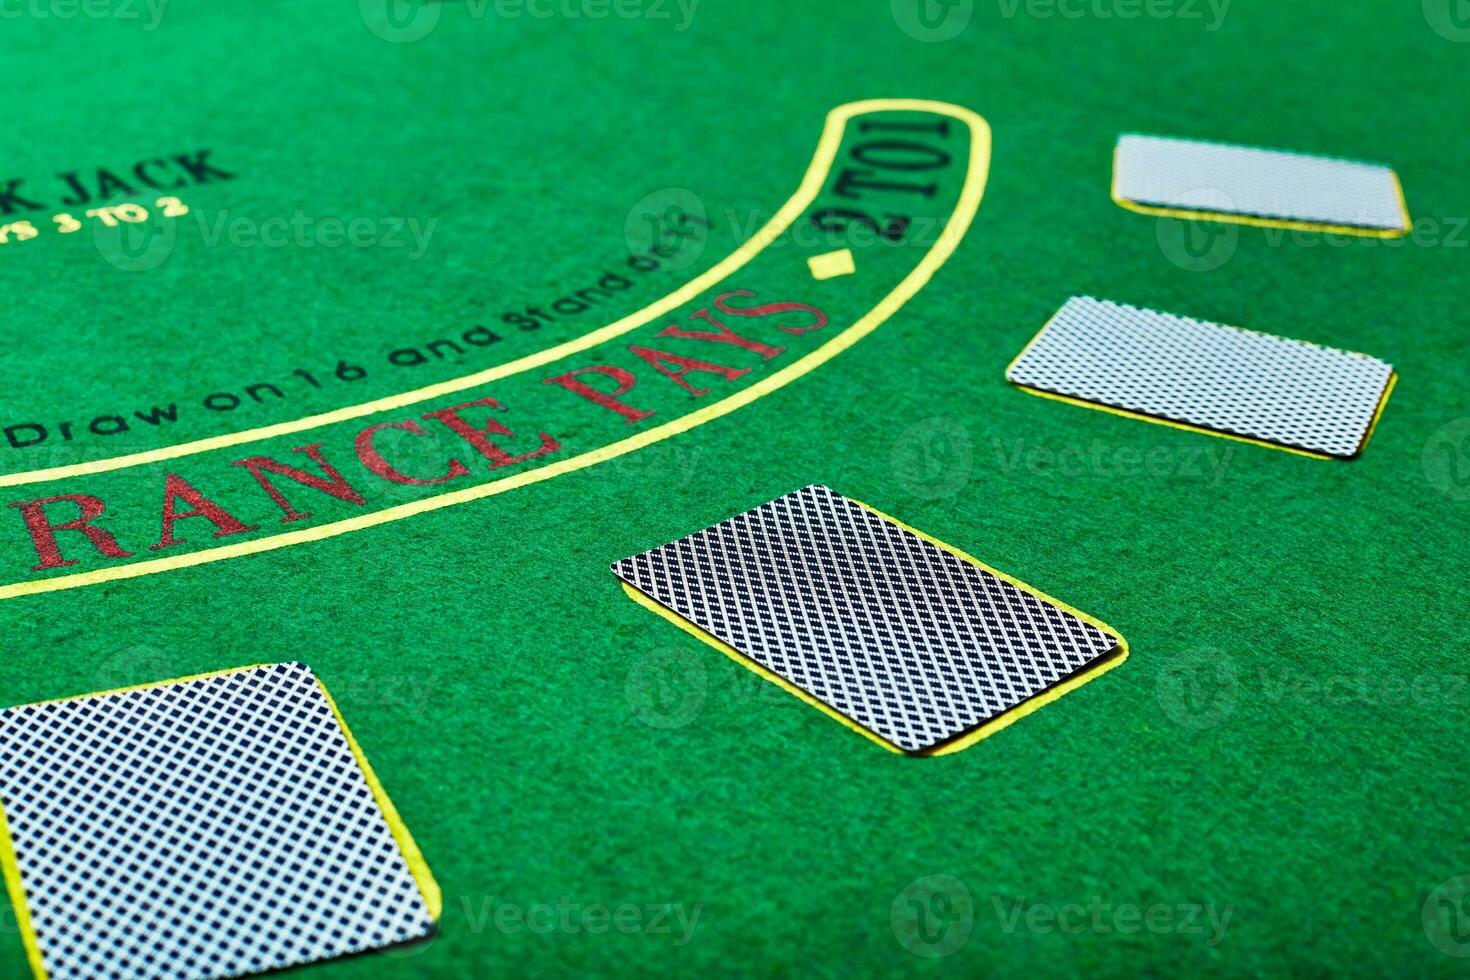 Playing cards on green table surface. Casino, gambling, poker concept photo